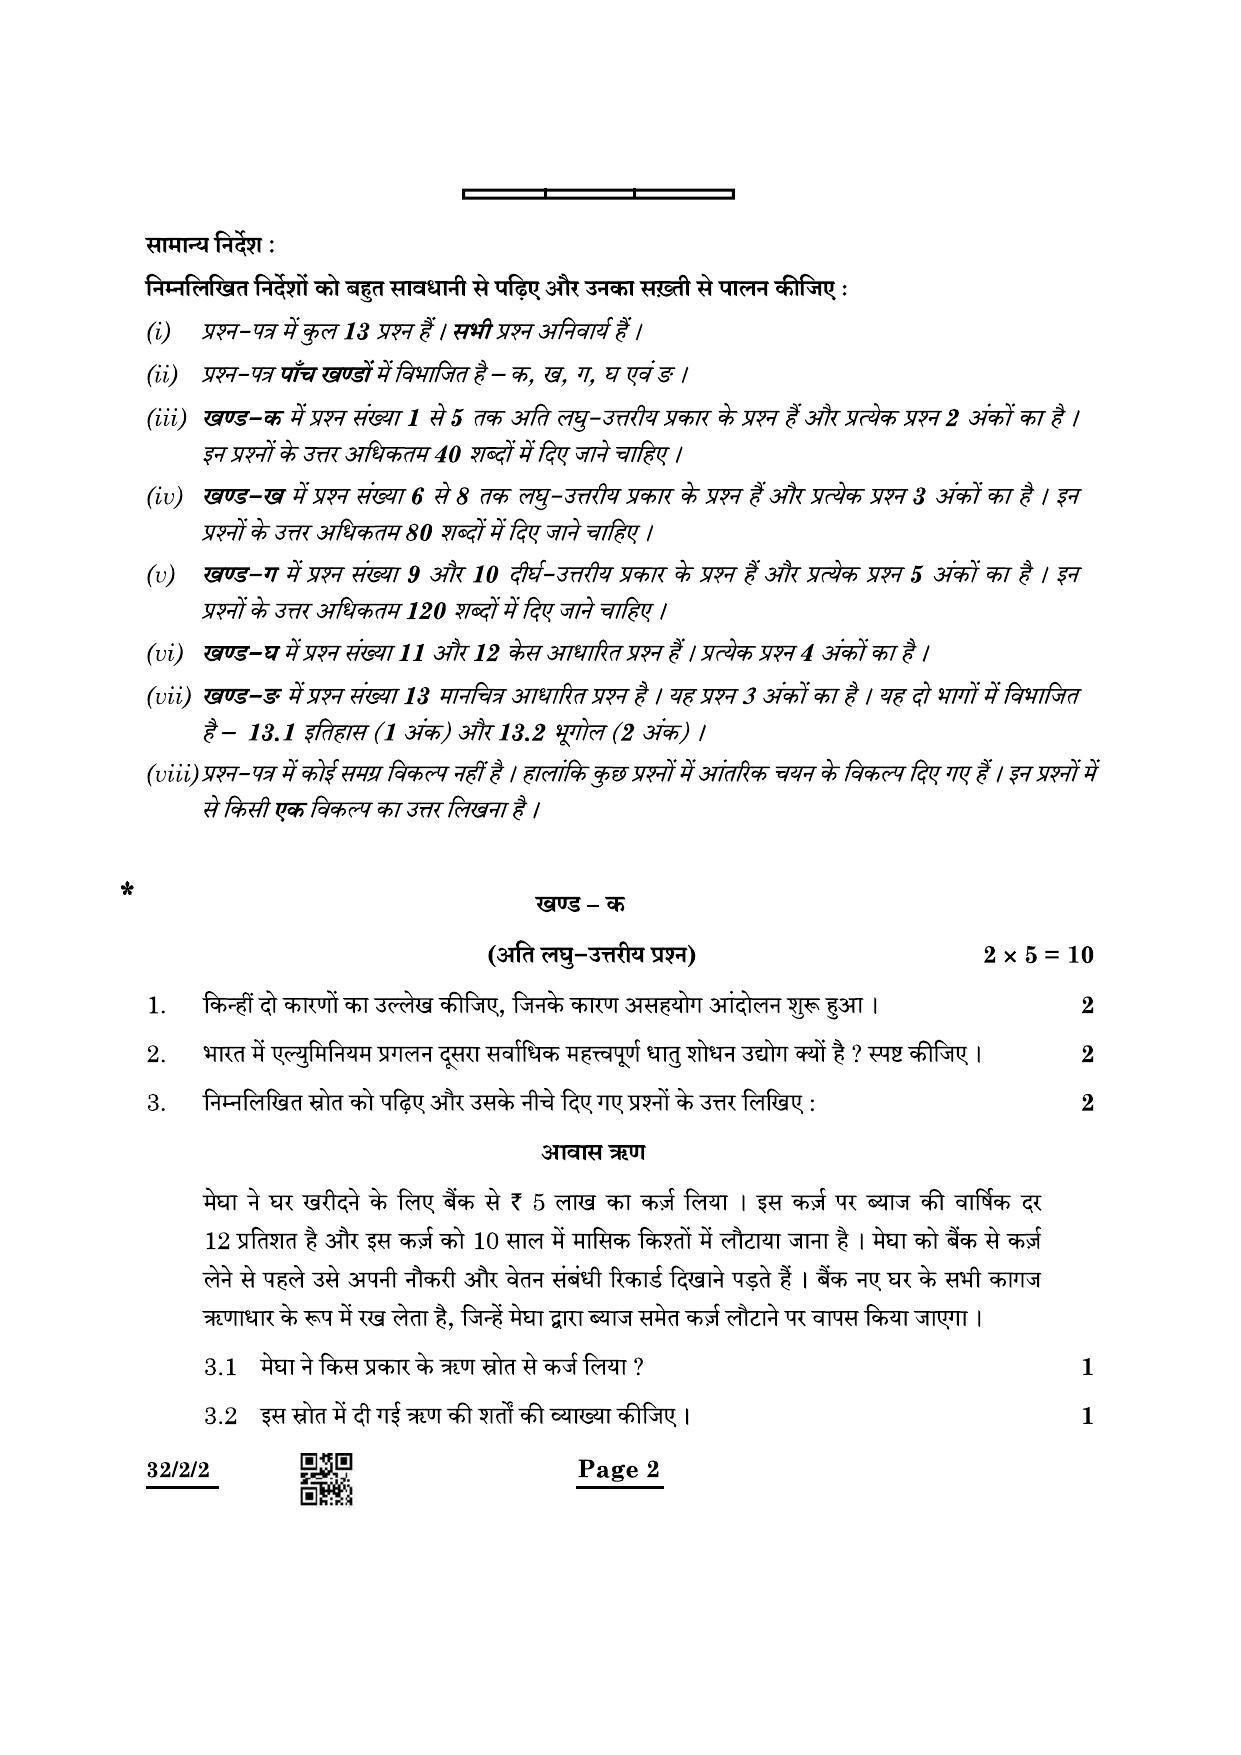 CBSE Class 10 32-2-2 Social Science 2022 Question Paper - Page 2